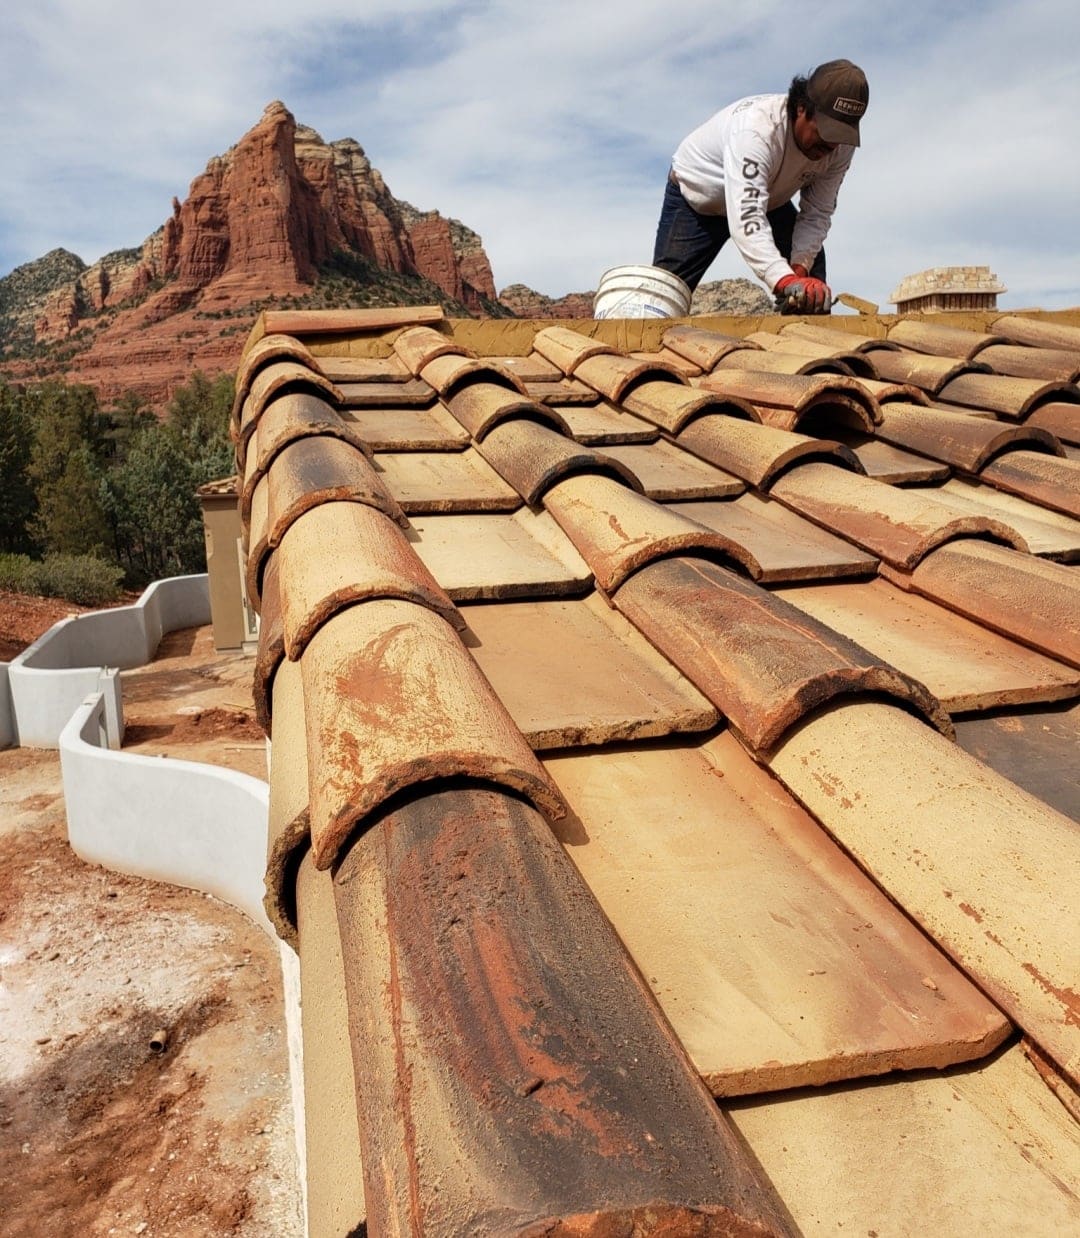 Dedicated worker in Estancia assiduously installing tile roofing.